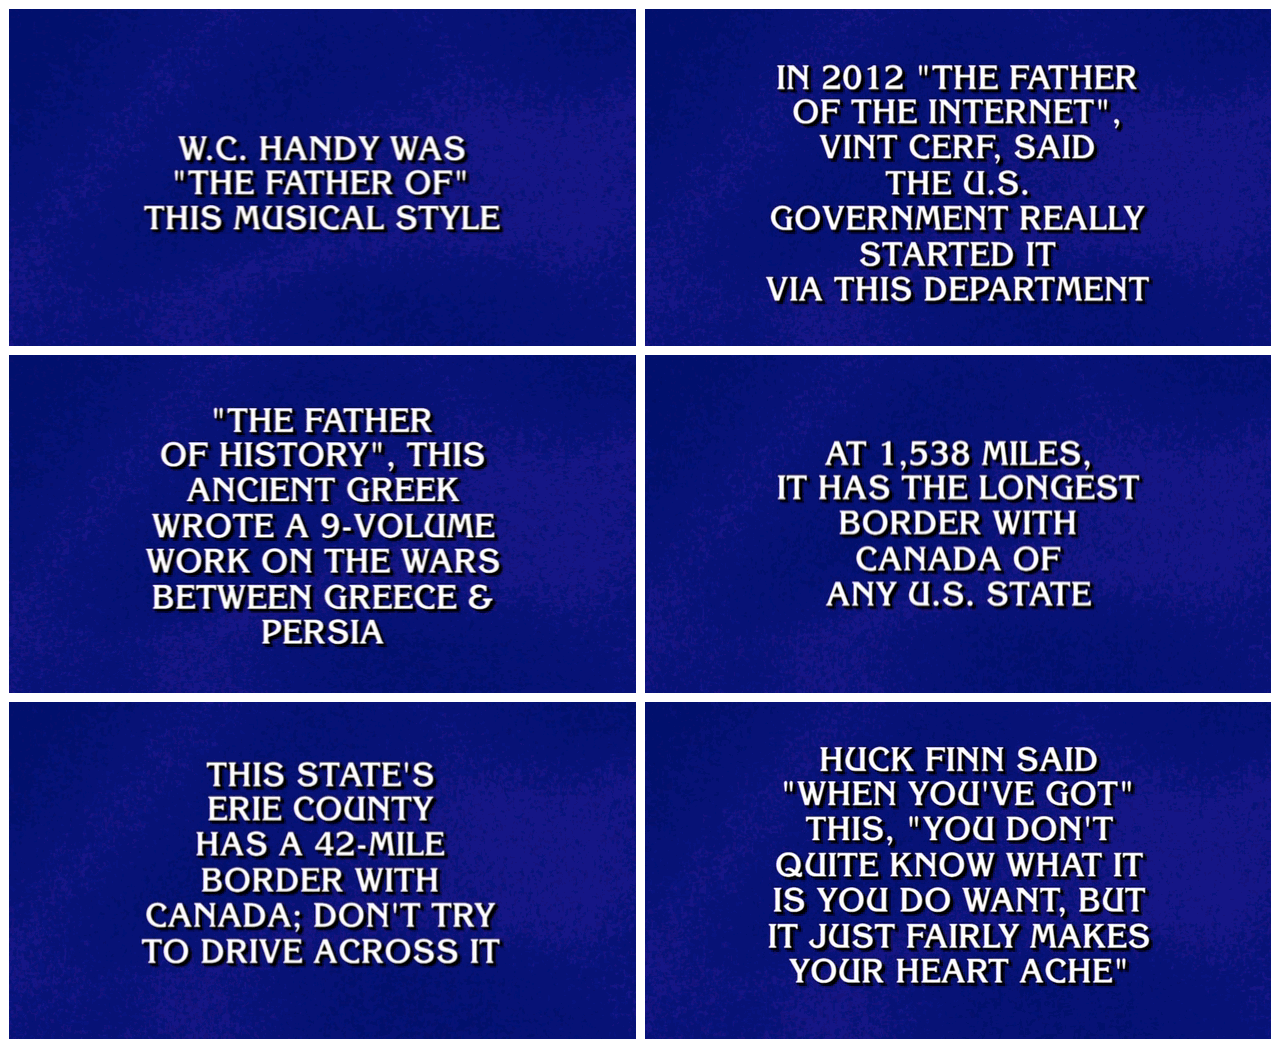 Jeopardy! Game Show - Fonts In Use